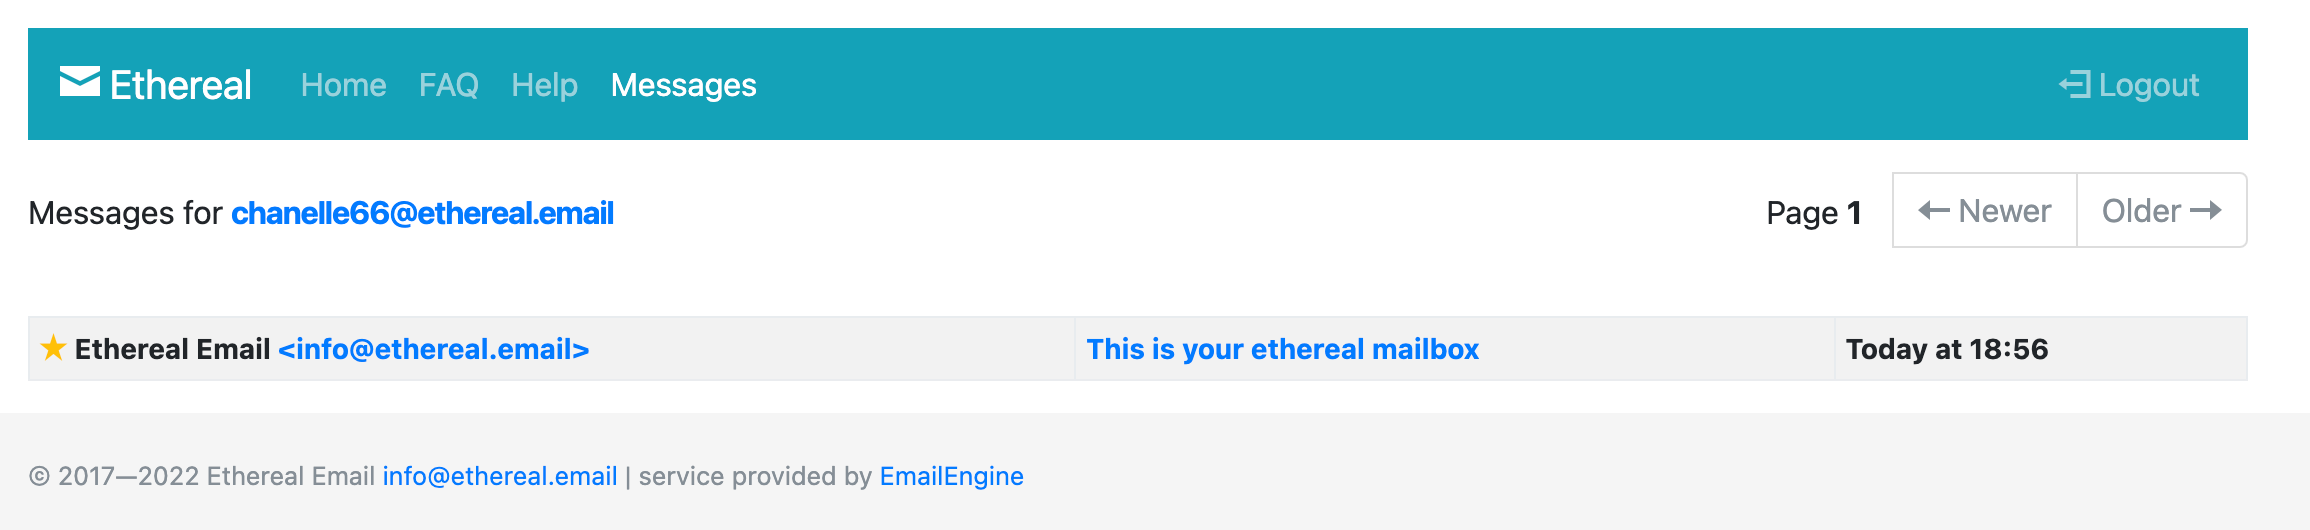 https://ethereal.email/messages